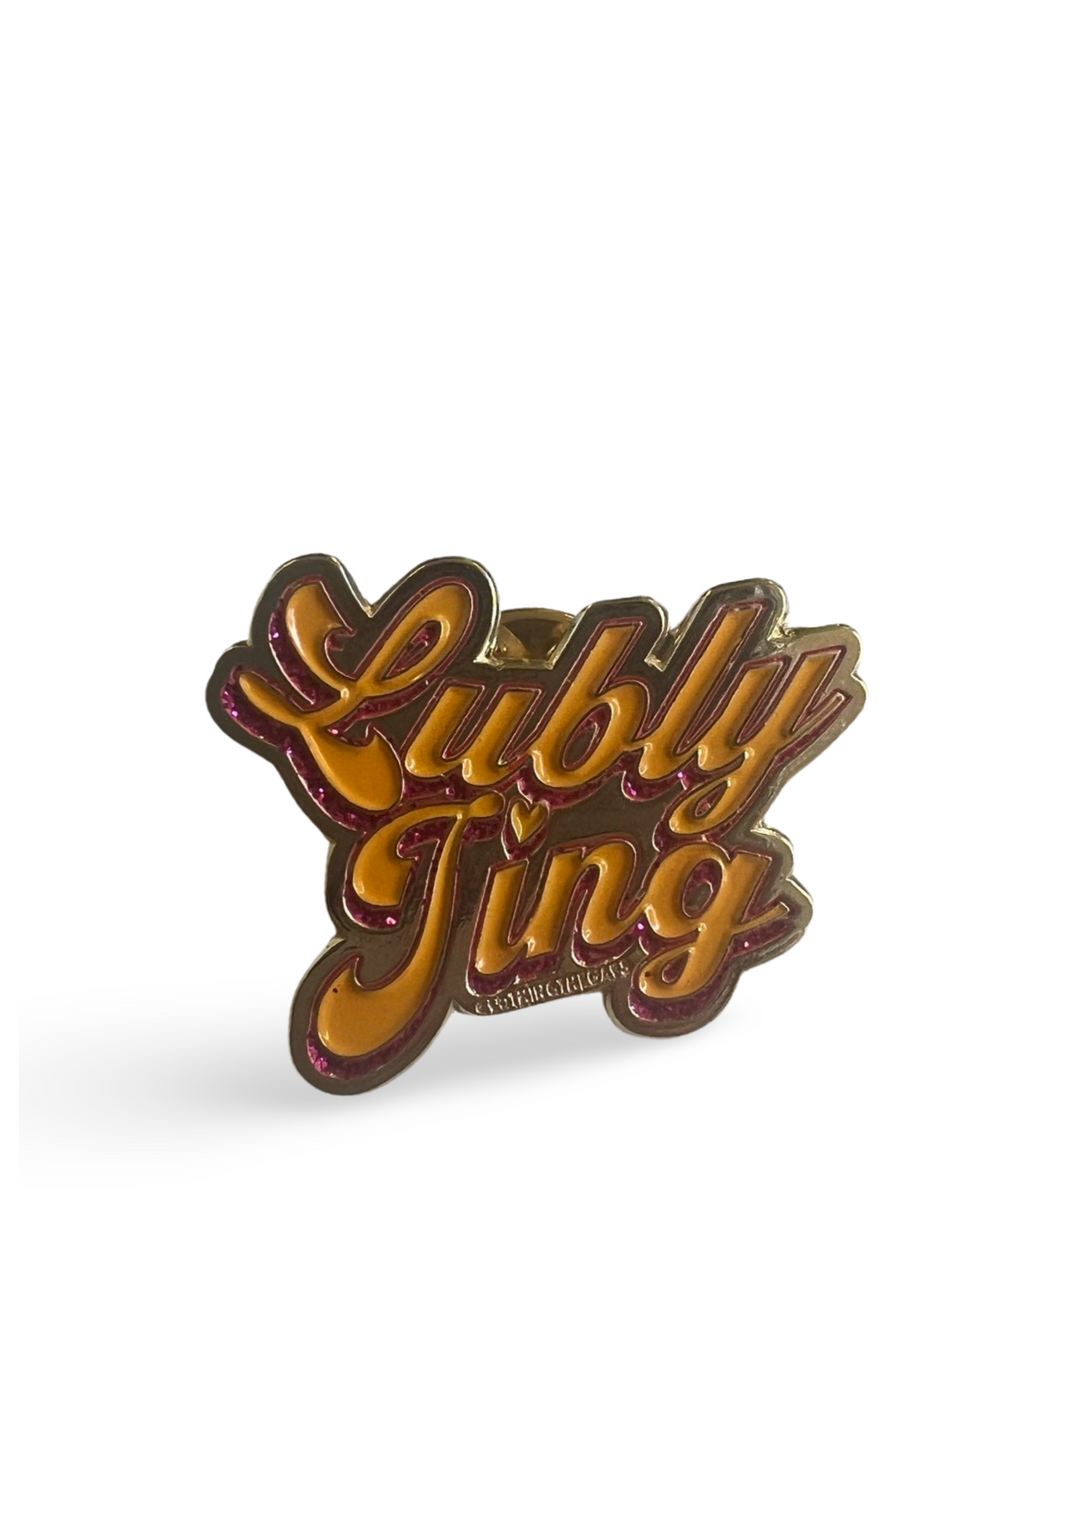 Lubly Ting Pin